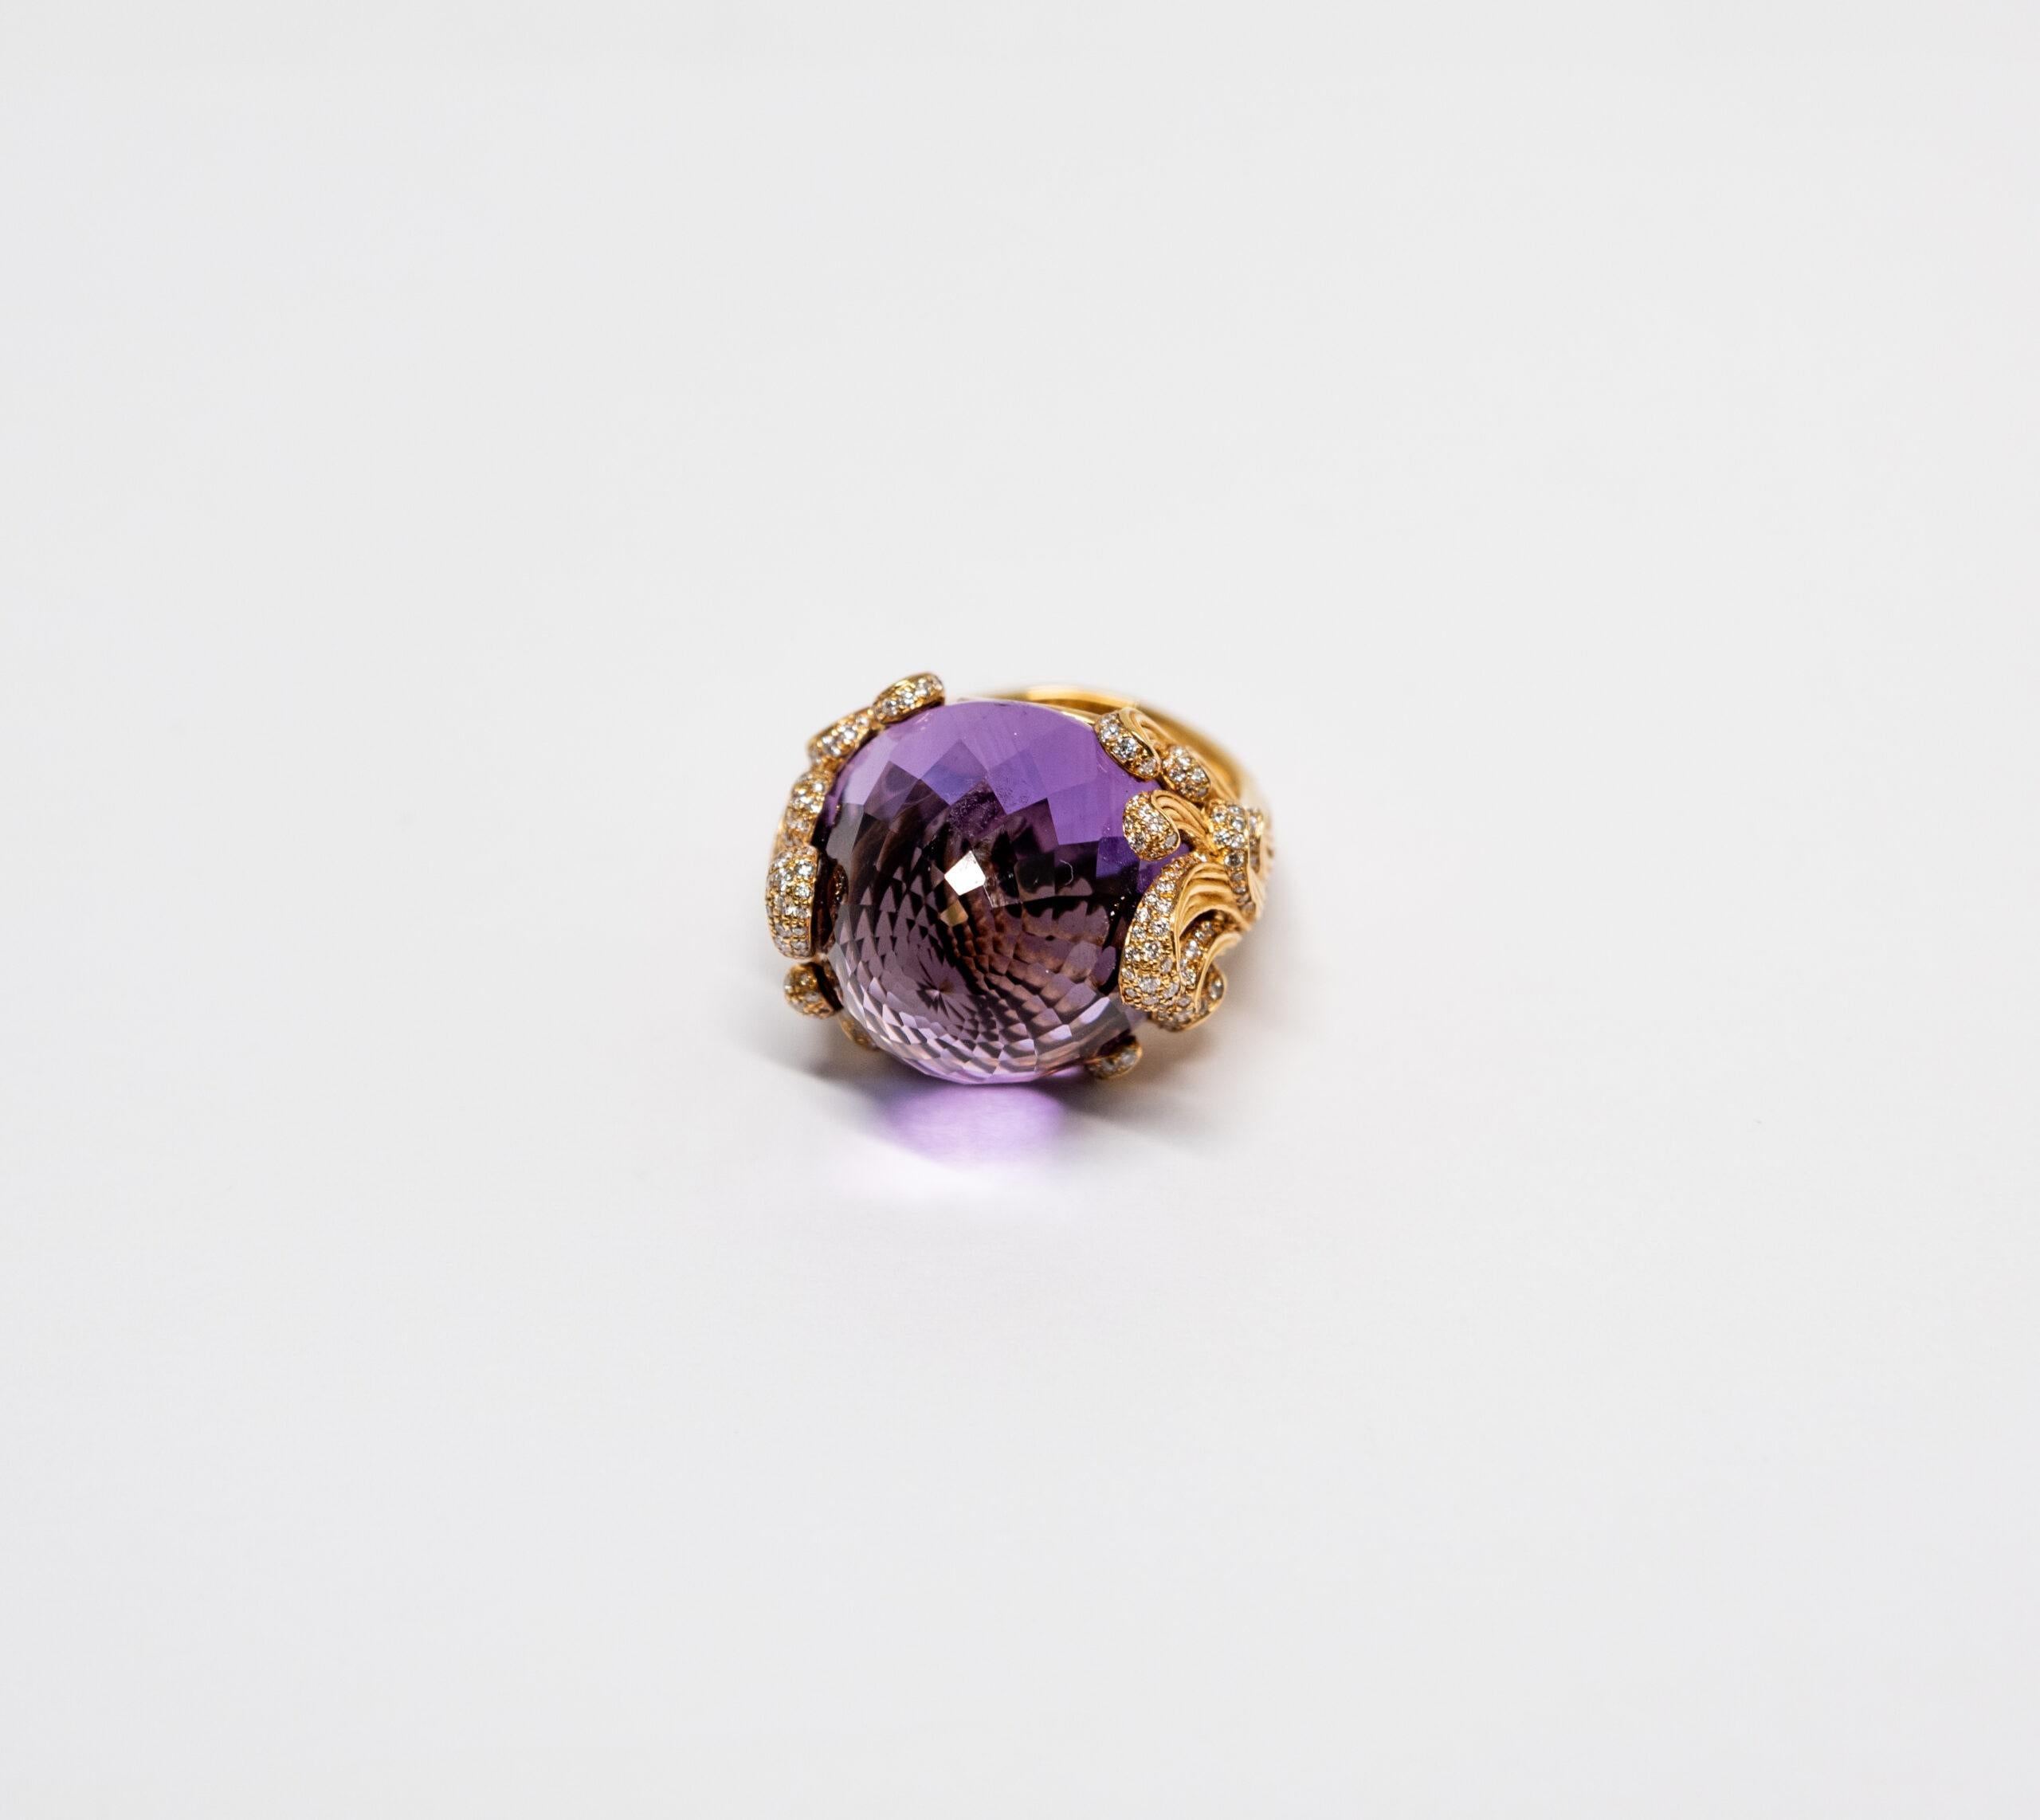 10068452 Carrera y Carrera
This ring is made of 18K Yellow Gold. The top of the ring is decorated with large Amethyst (~30.48ct). The sides of the ring are paved with diamonds (~0.84ct)

Size – 56 (7.5 US)